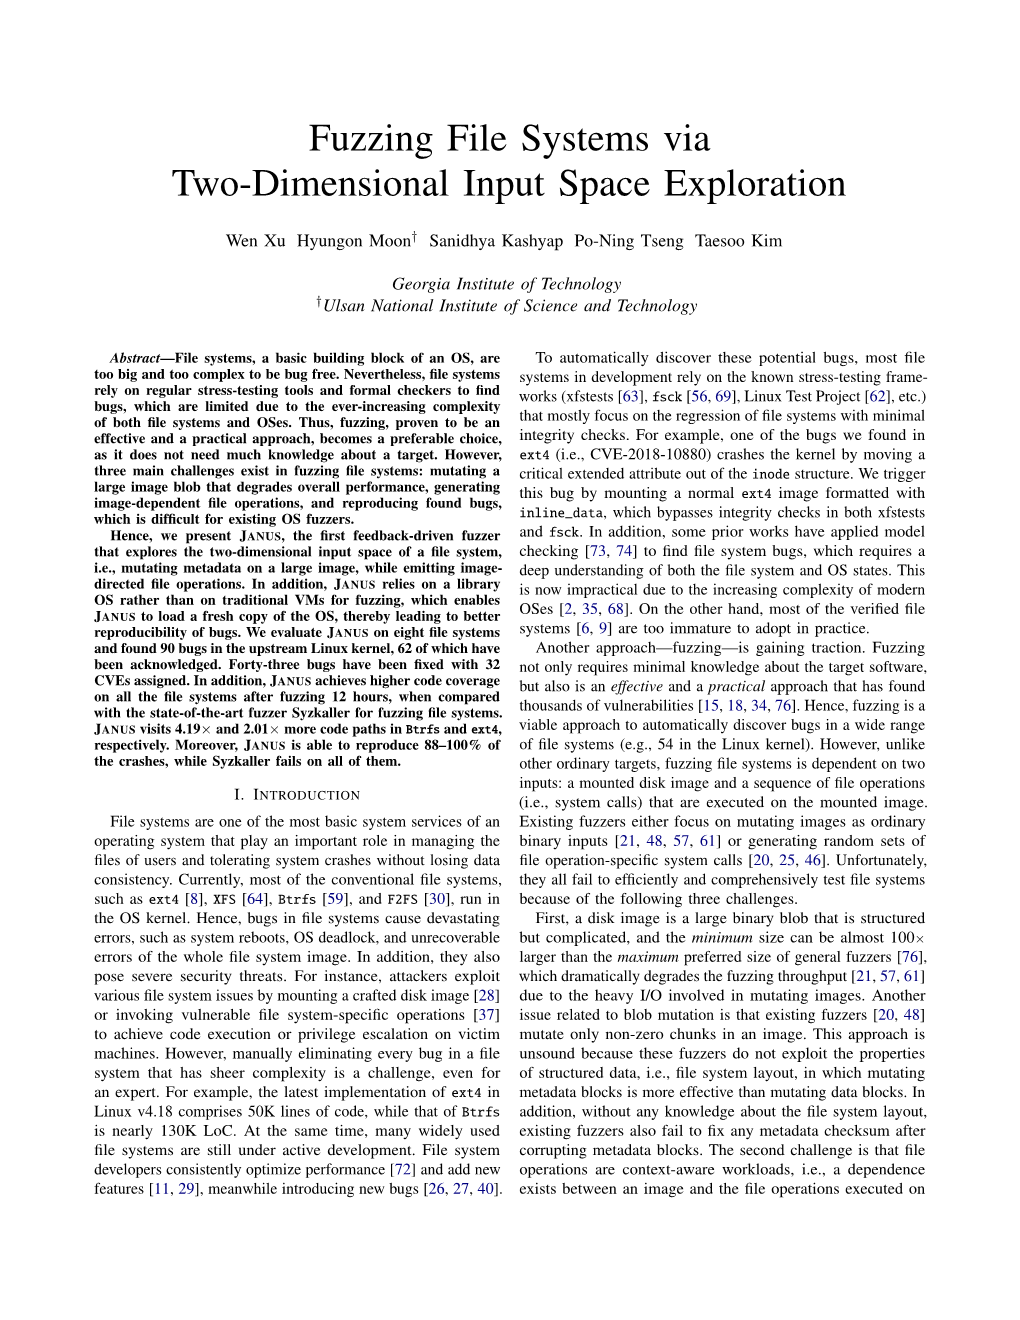 Fuzzing File Systems Via Two-Dimensional Input Space Exploration